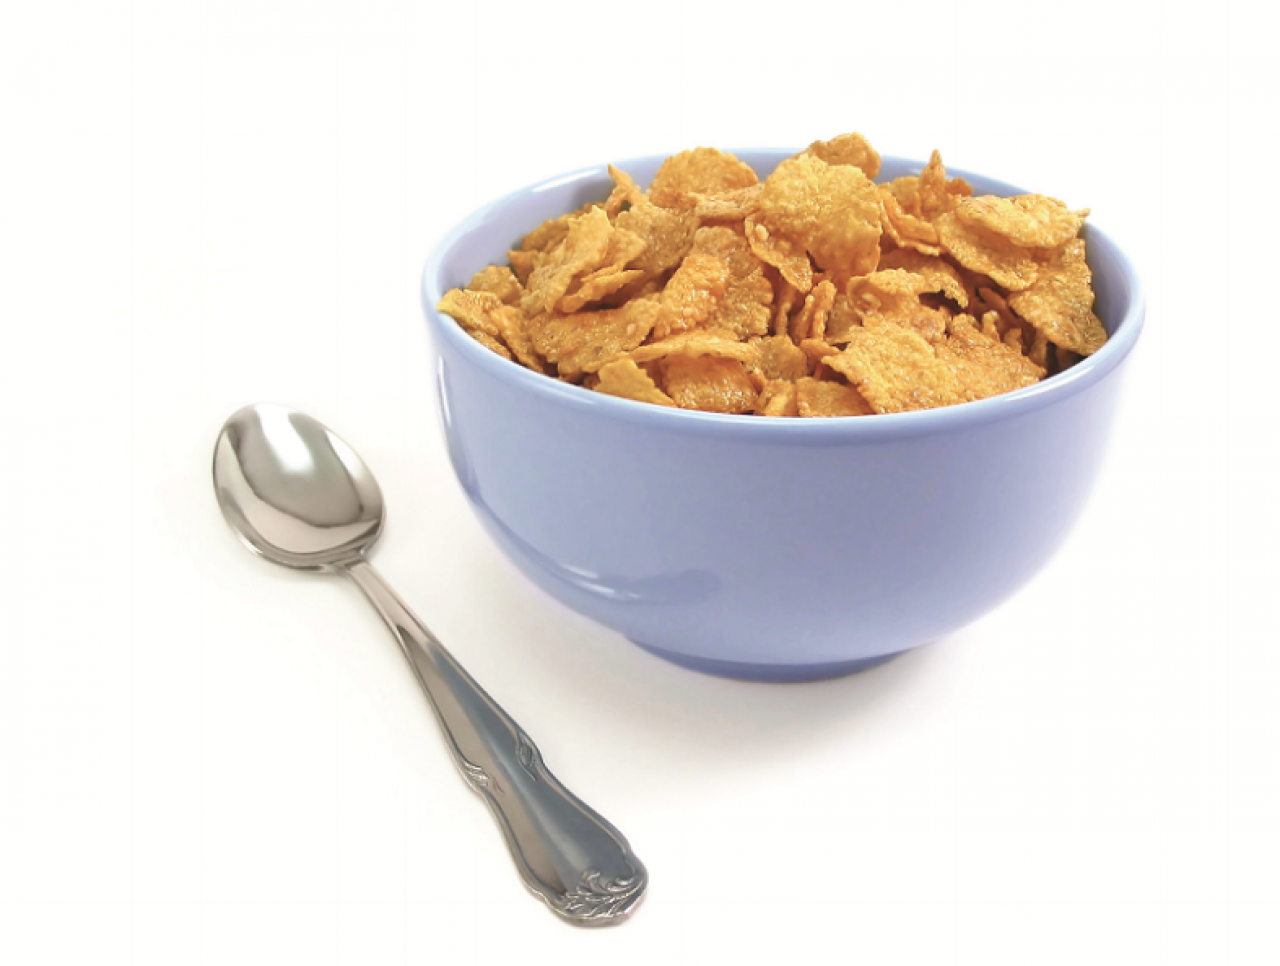 oatmeal clipart frosted flakes